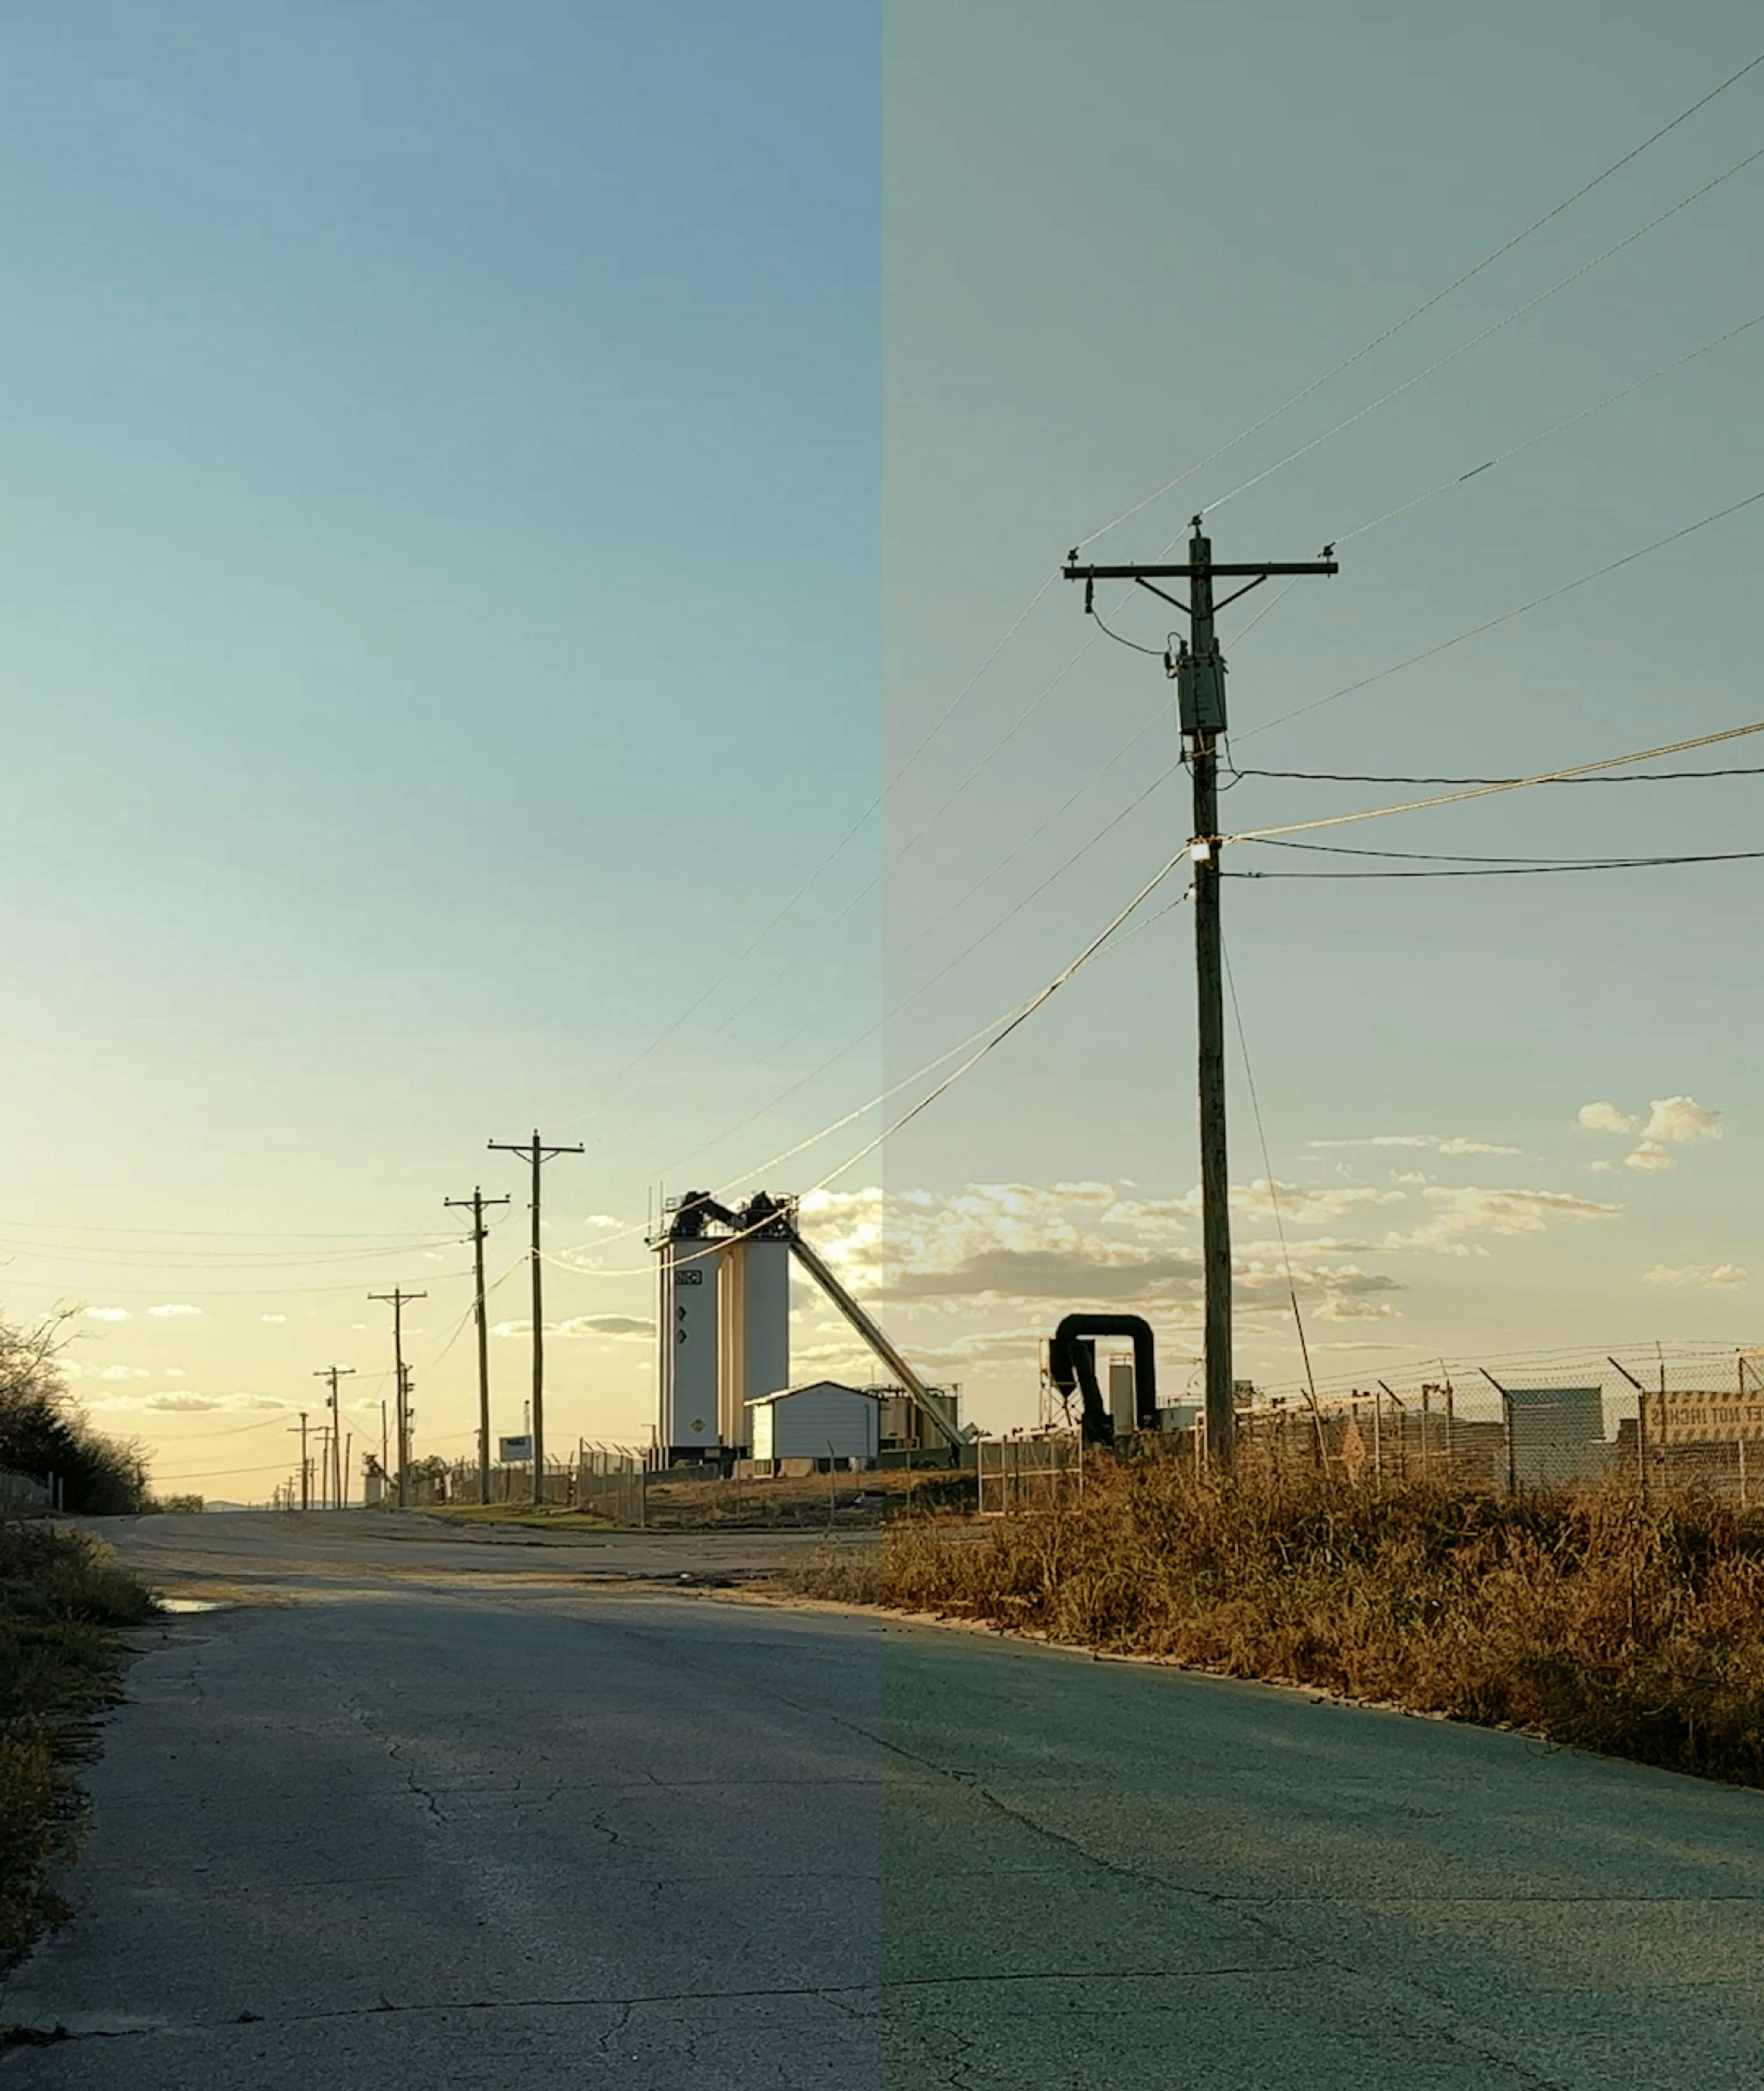 Before / After "Green Film" LUT by Niles Grey